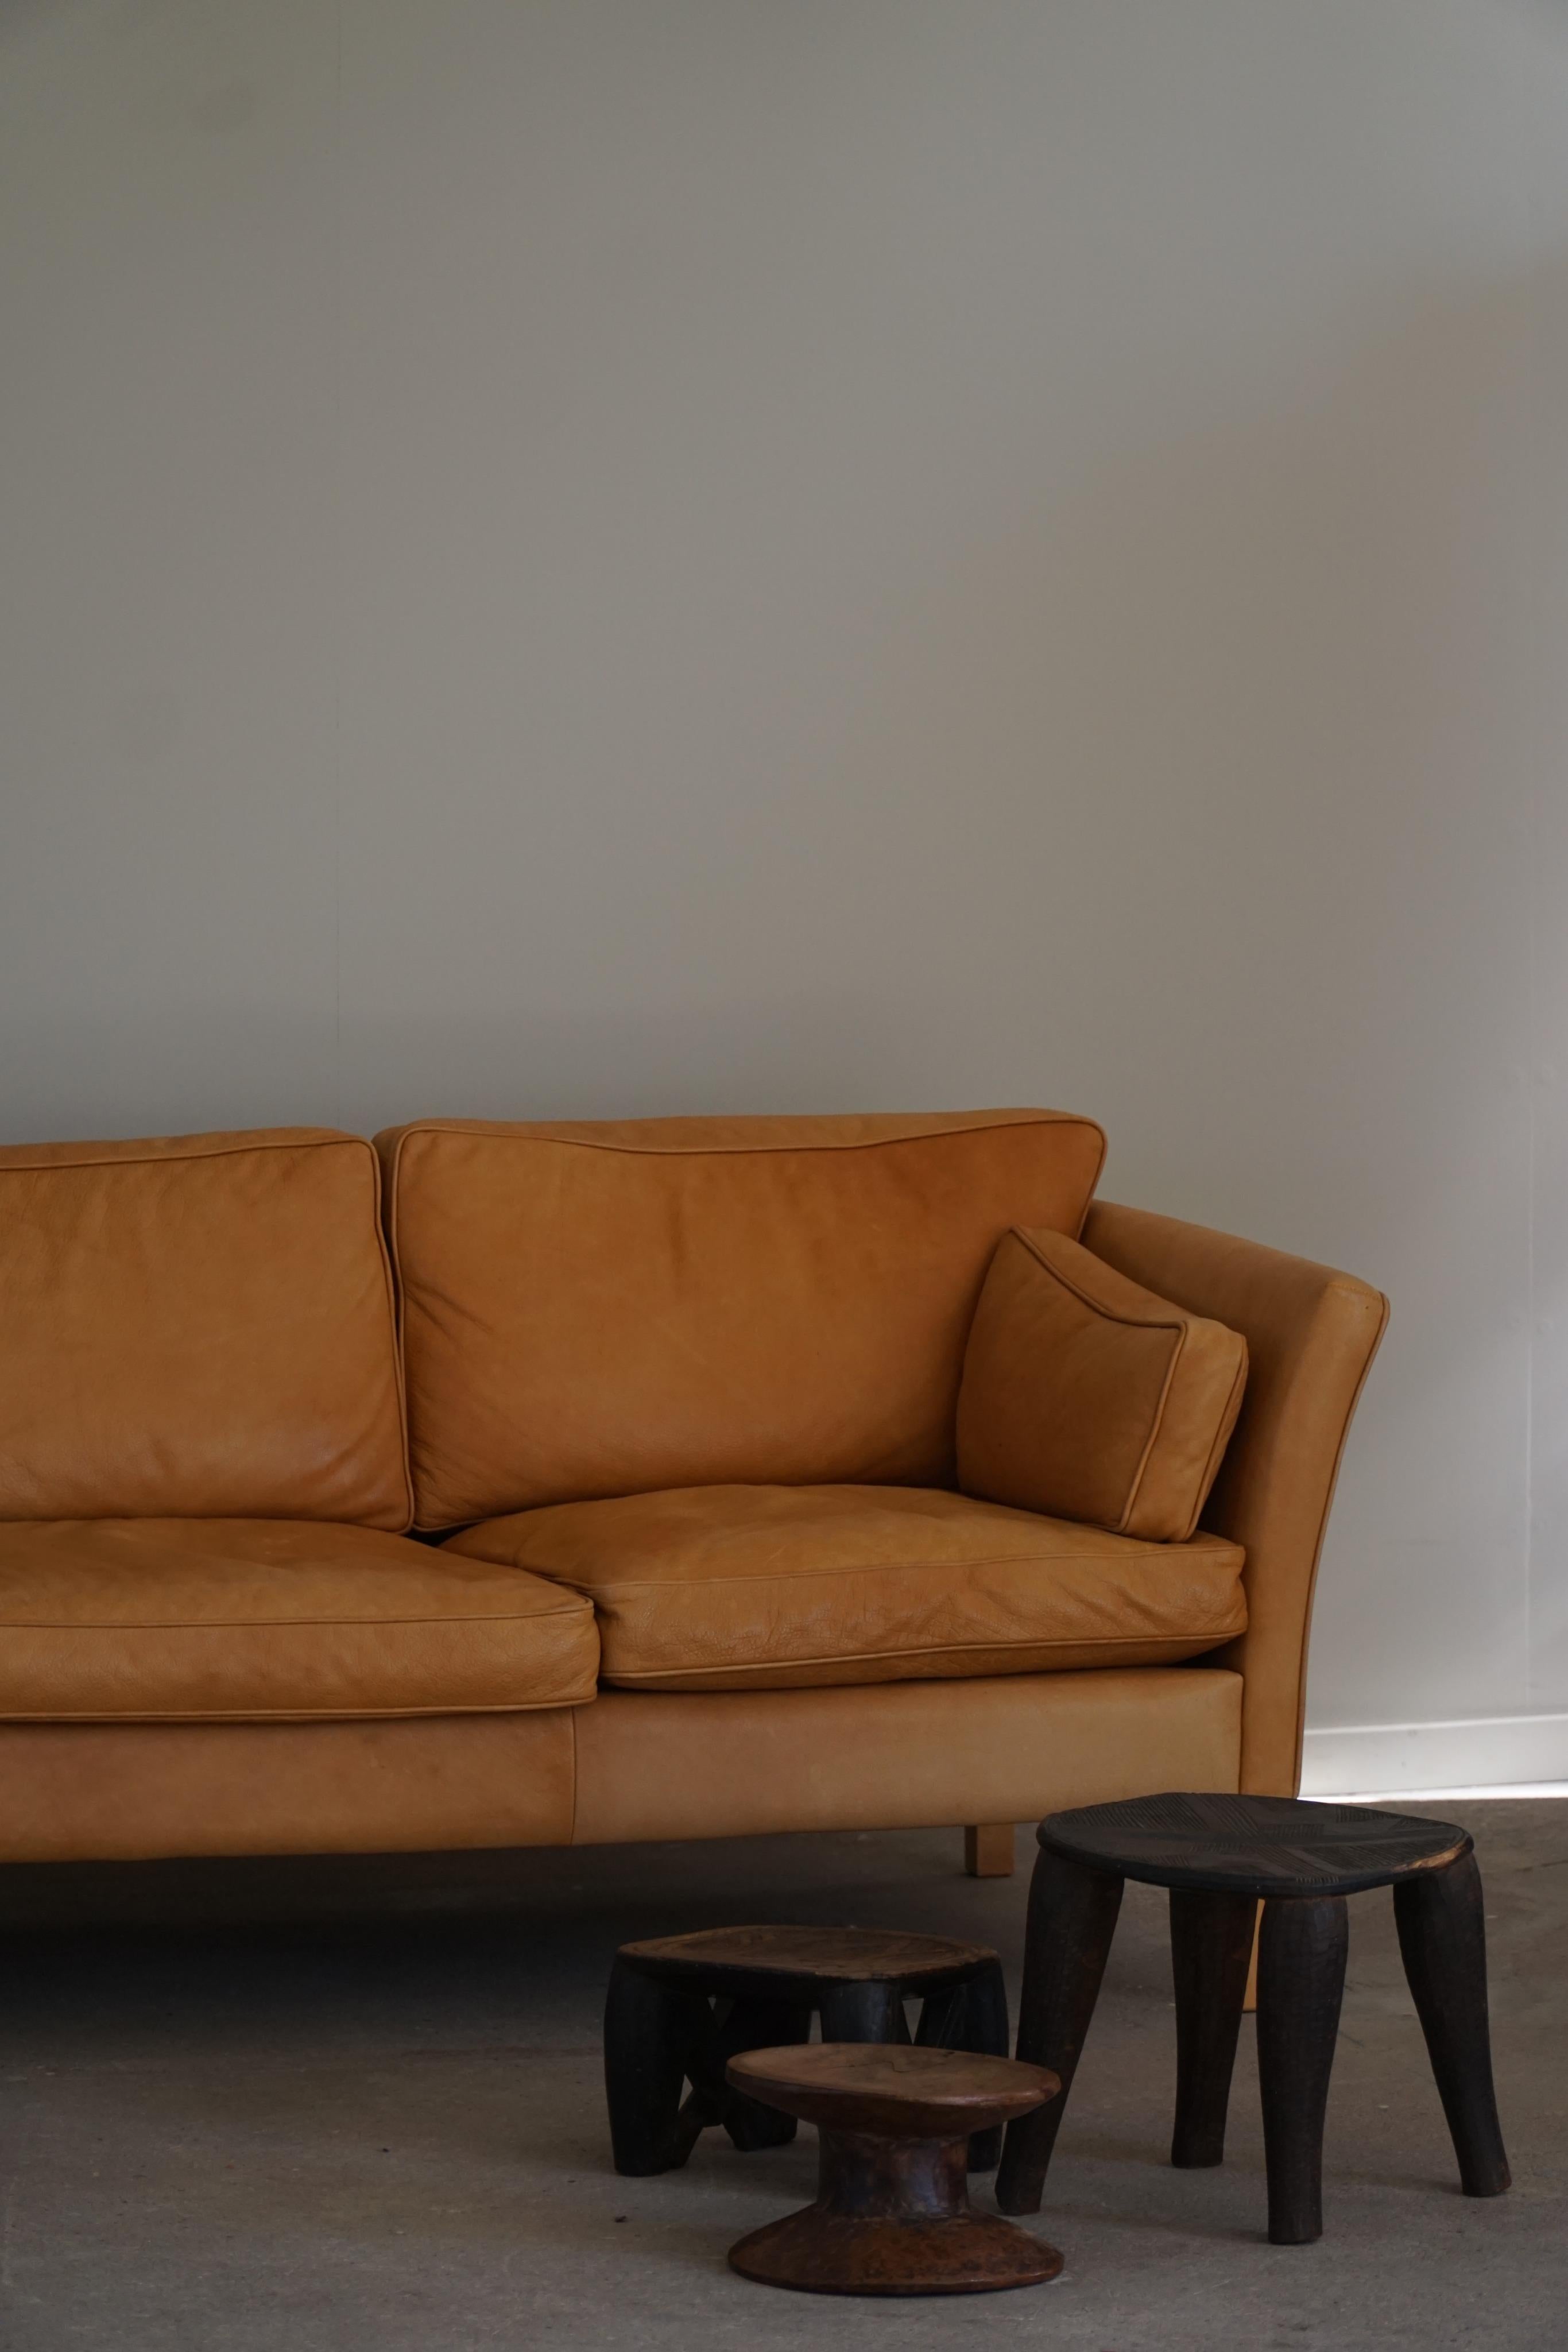 20th Century Danish Midcentury Stouby 3-Seater Sofa in Cognac Brown Leather, Made in 1970s For Sale